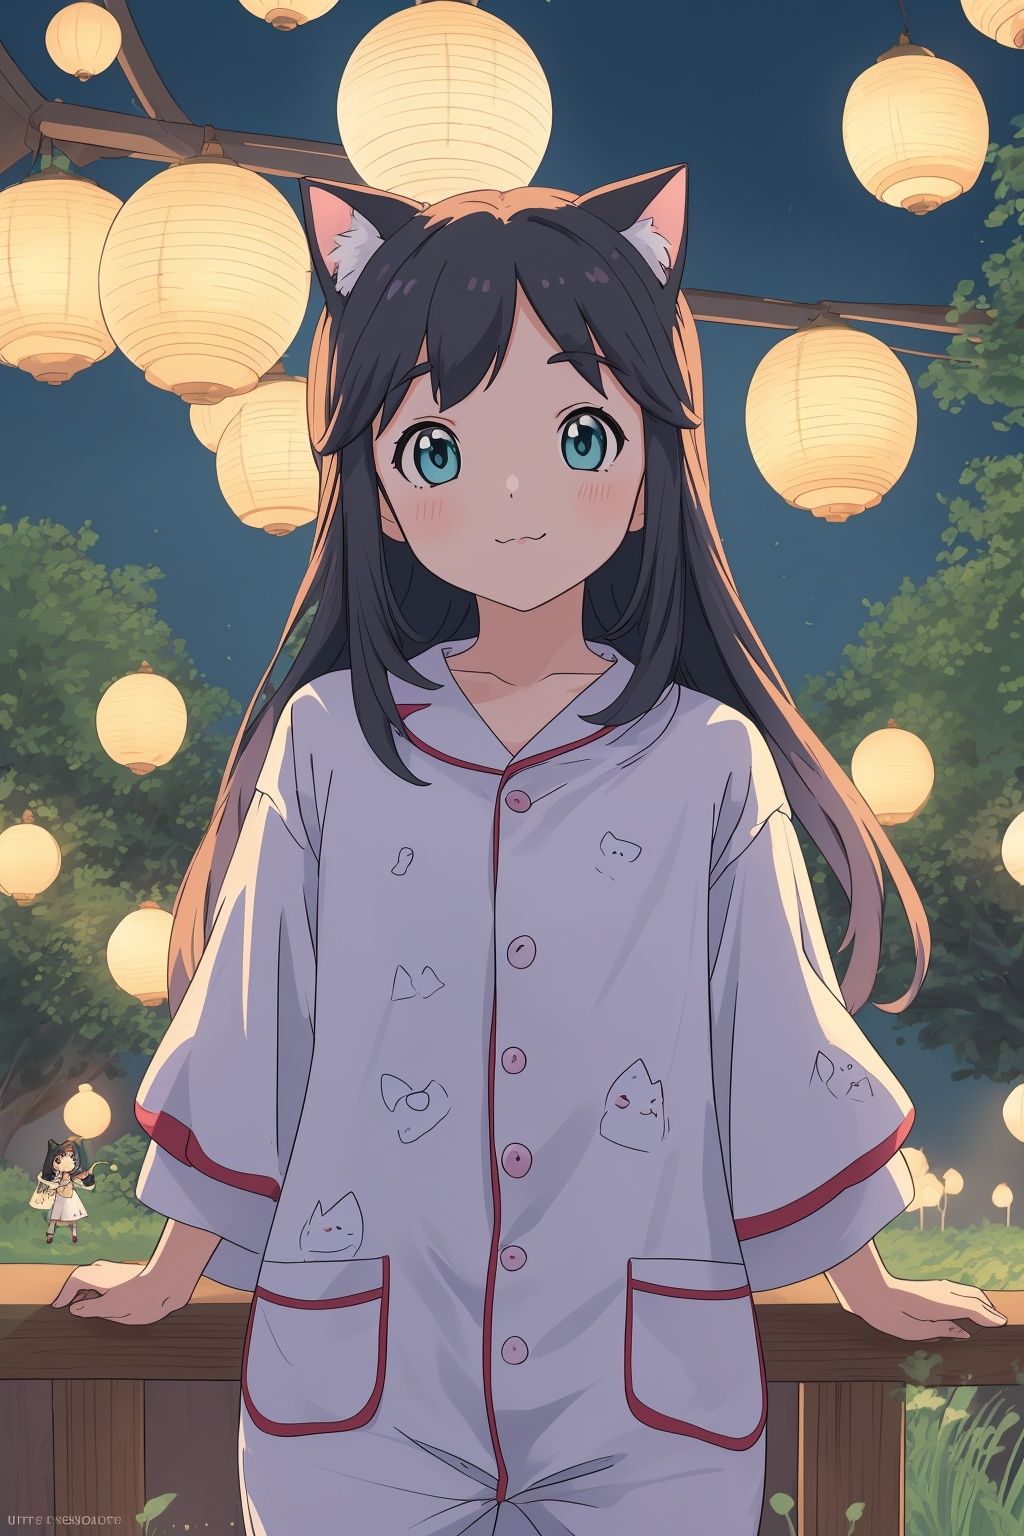  demon and angel,
A girl wearing a charming cat-themed onesie pajama in the style reminiscent of Studio Ghibli. The girl exudes a sense of innocence and wonder, with bright and expressive eyes that captivate the viewer. Her sleepwear is beautifully illustrated with intricate patterns and delicate details, showcasing the attention to aesthetics and craftsmanship characteristic of Ghibli films. The overall composition of the scene reflects the enchanting and whimsical atmosphere commonly found in Studio Ghibli animations. The girl is surrounded by a serene and magical setting, with lush nature elements, softly glowing lanterns, and a gentle breeze that adds movement to her hair and the surrounding scenery. The color palette is rich and vibrant, with a mix of warm and cool tones that create a harmonious and inviting ambiance. (best quality, highres, ultra-detailed:1.2), soft and warm lighting, Ghibli-inspired art style, intricate patterns and details, magical and serene atmosphere, expressive and captivating eyes.

Negative Prompt:
nsfw, (low quality, normal quality, worst quality, jpeg artifacts), cropped, monochrome, lowres, low saturation, (watermark), (white letters), inappropriate poses, excessive fanservice, unnatural proportions, poor character design, harsh lighting, cluttered background, busy patterns, dull color palette.